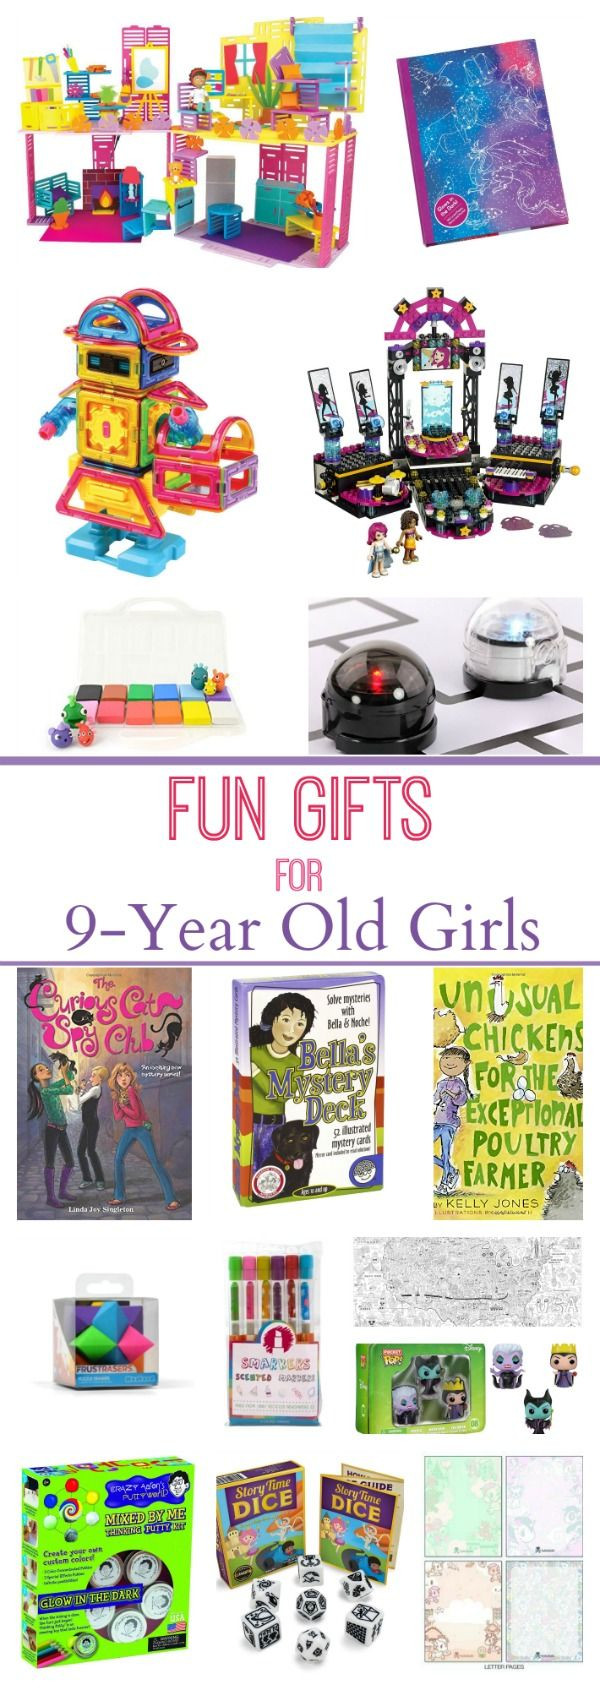 Birthday Gifts For 9 Year Old Girl
 Gifts for 9 Year Old Girls